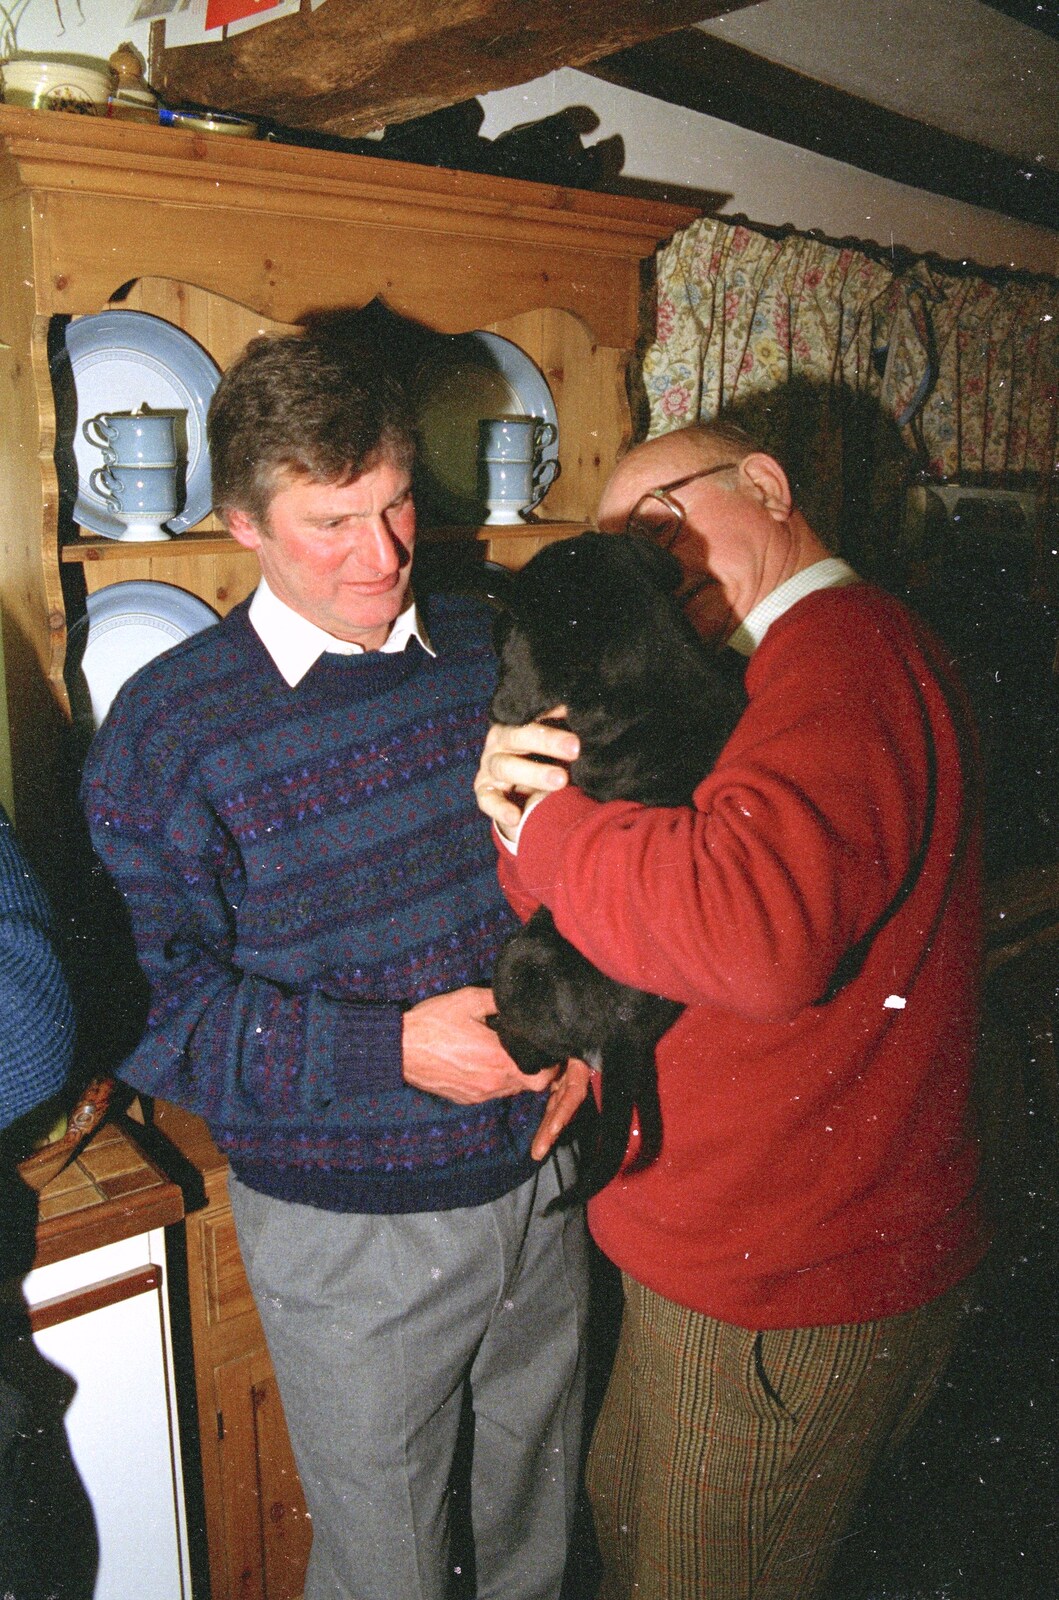 Geoff inspects the puppy from Christmas in Devon and Stuston - 25th December 1991